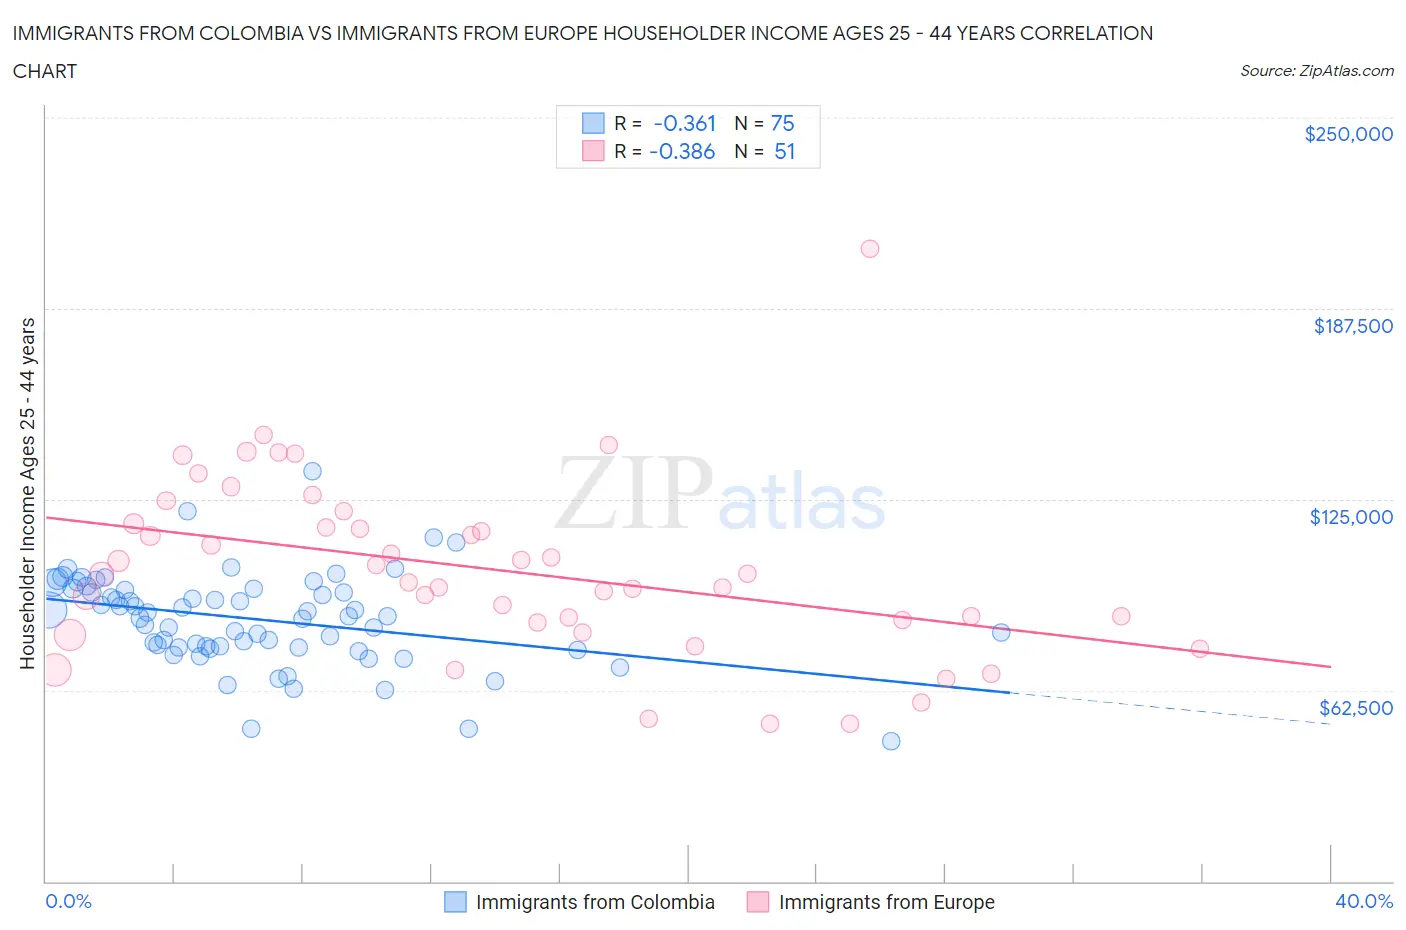 Immigrants from Colombia vs Immigrants from Europe Householder Income Ages 25 - 44 years